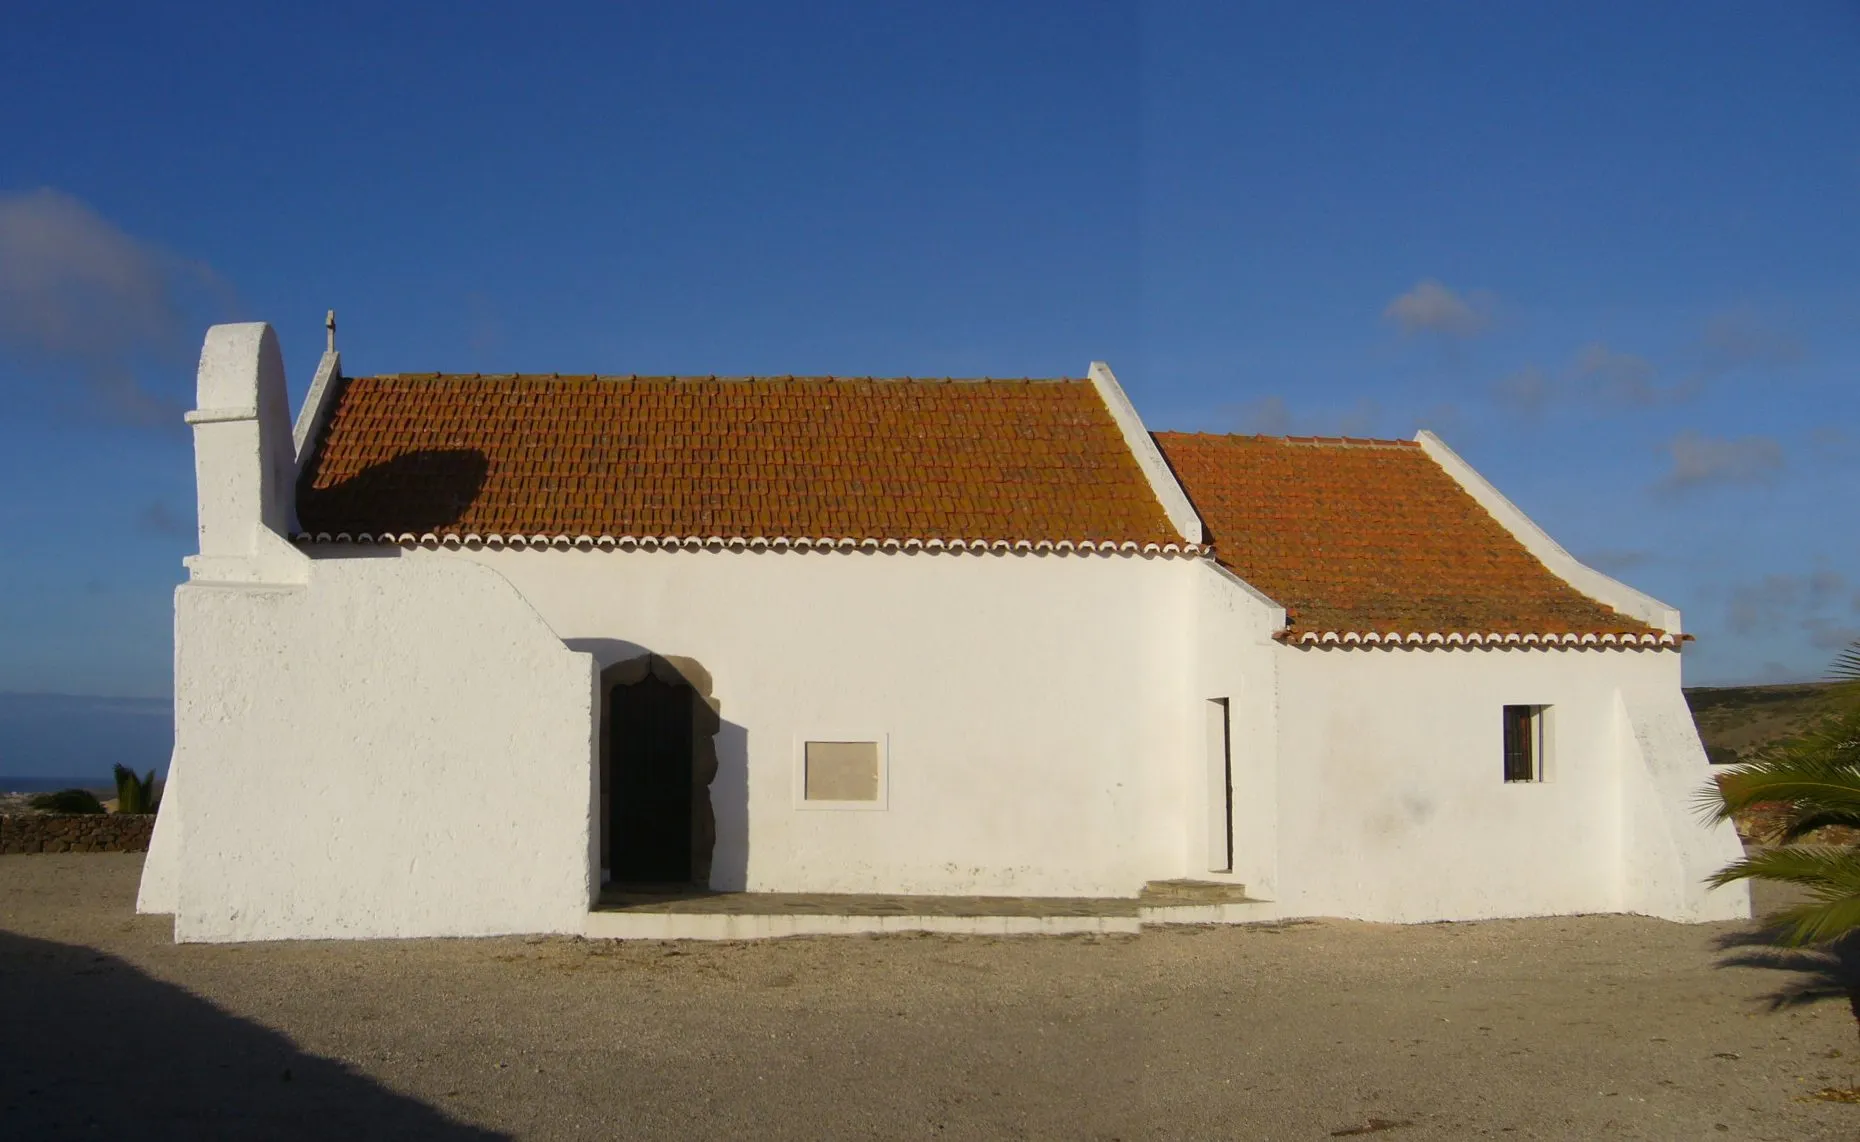 Photo showing: The church in Carrapateira, Bordeira, Aljezur. The municipal website says it is dedicated to Nossa Senhora da Conceição (Our Lady of Conception) but the diocesan website gives no patron.